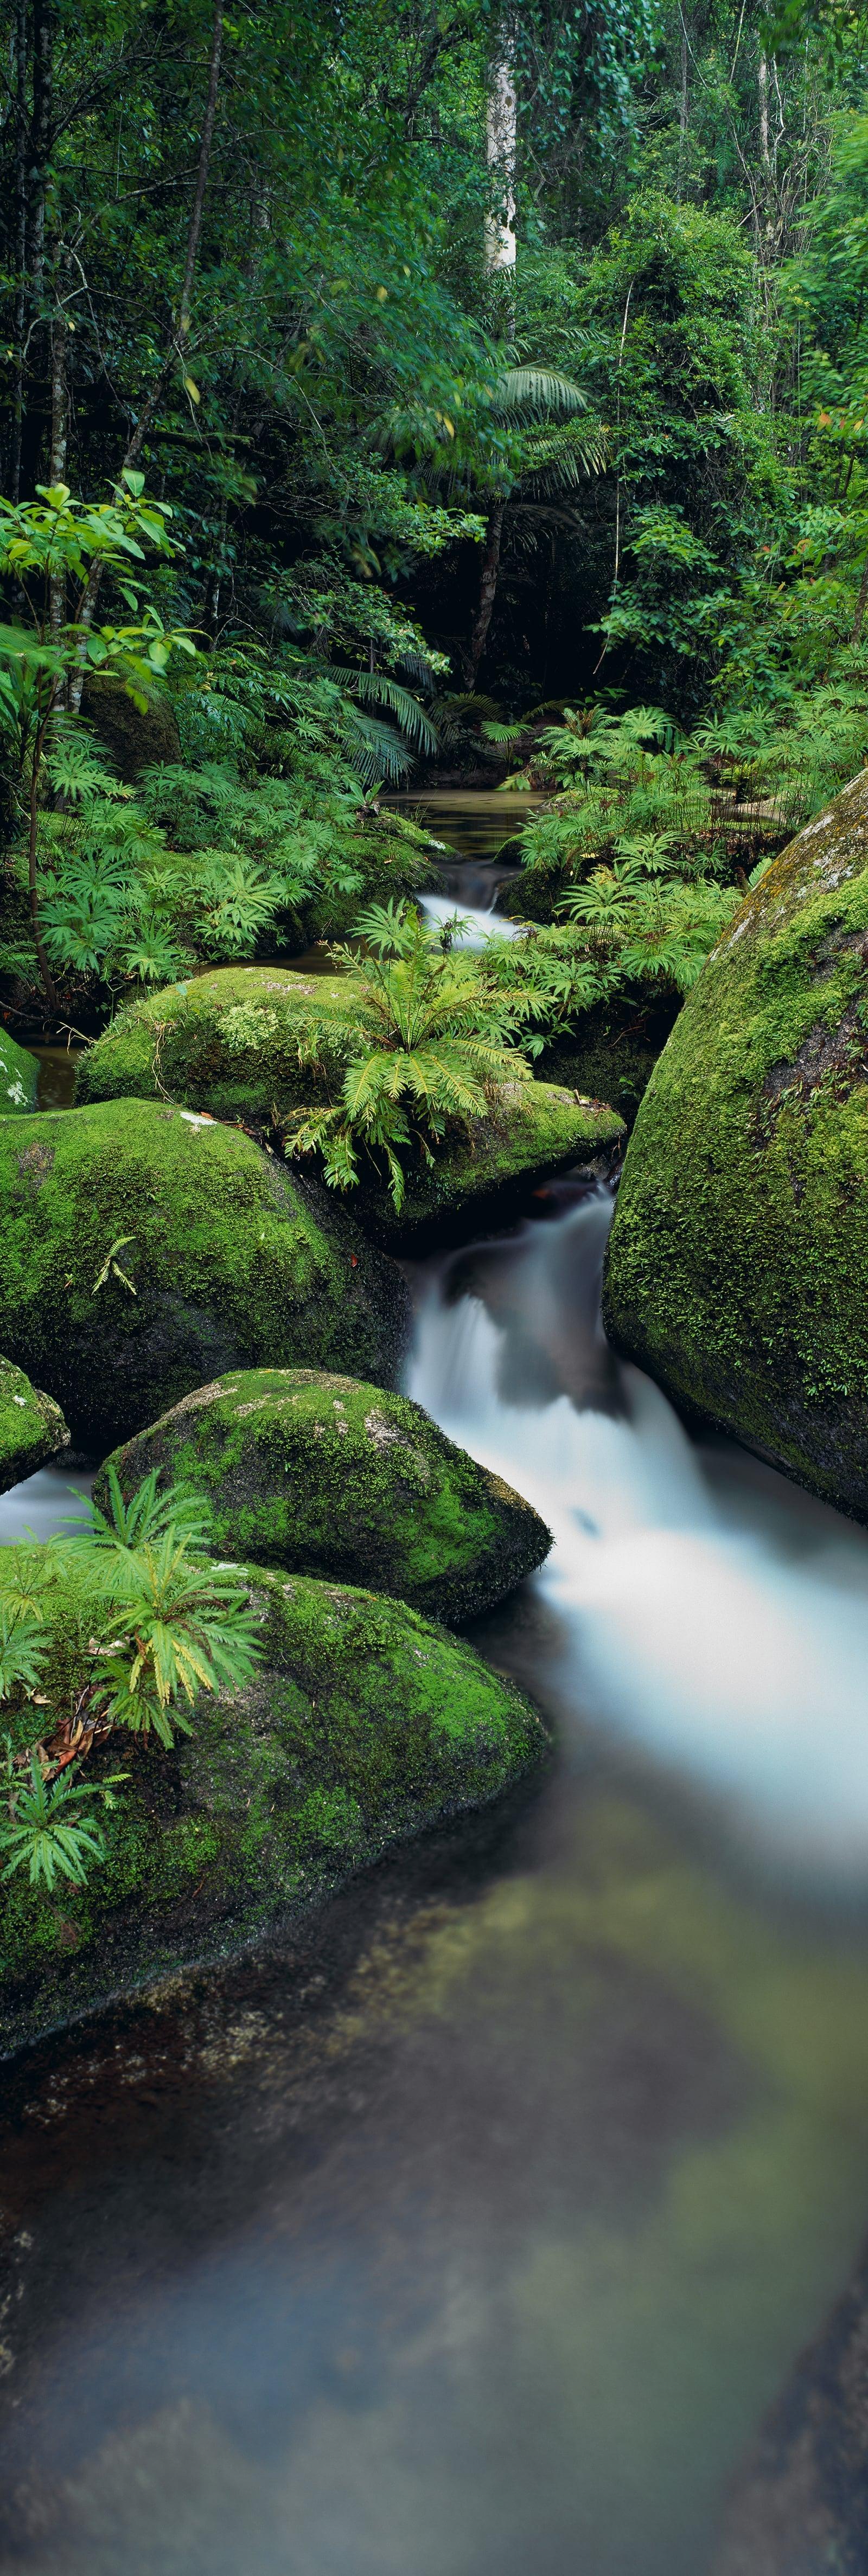 Creek running through mossy boulders in the rainforest of Daintree National Park Australia